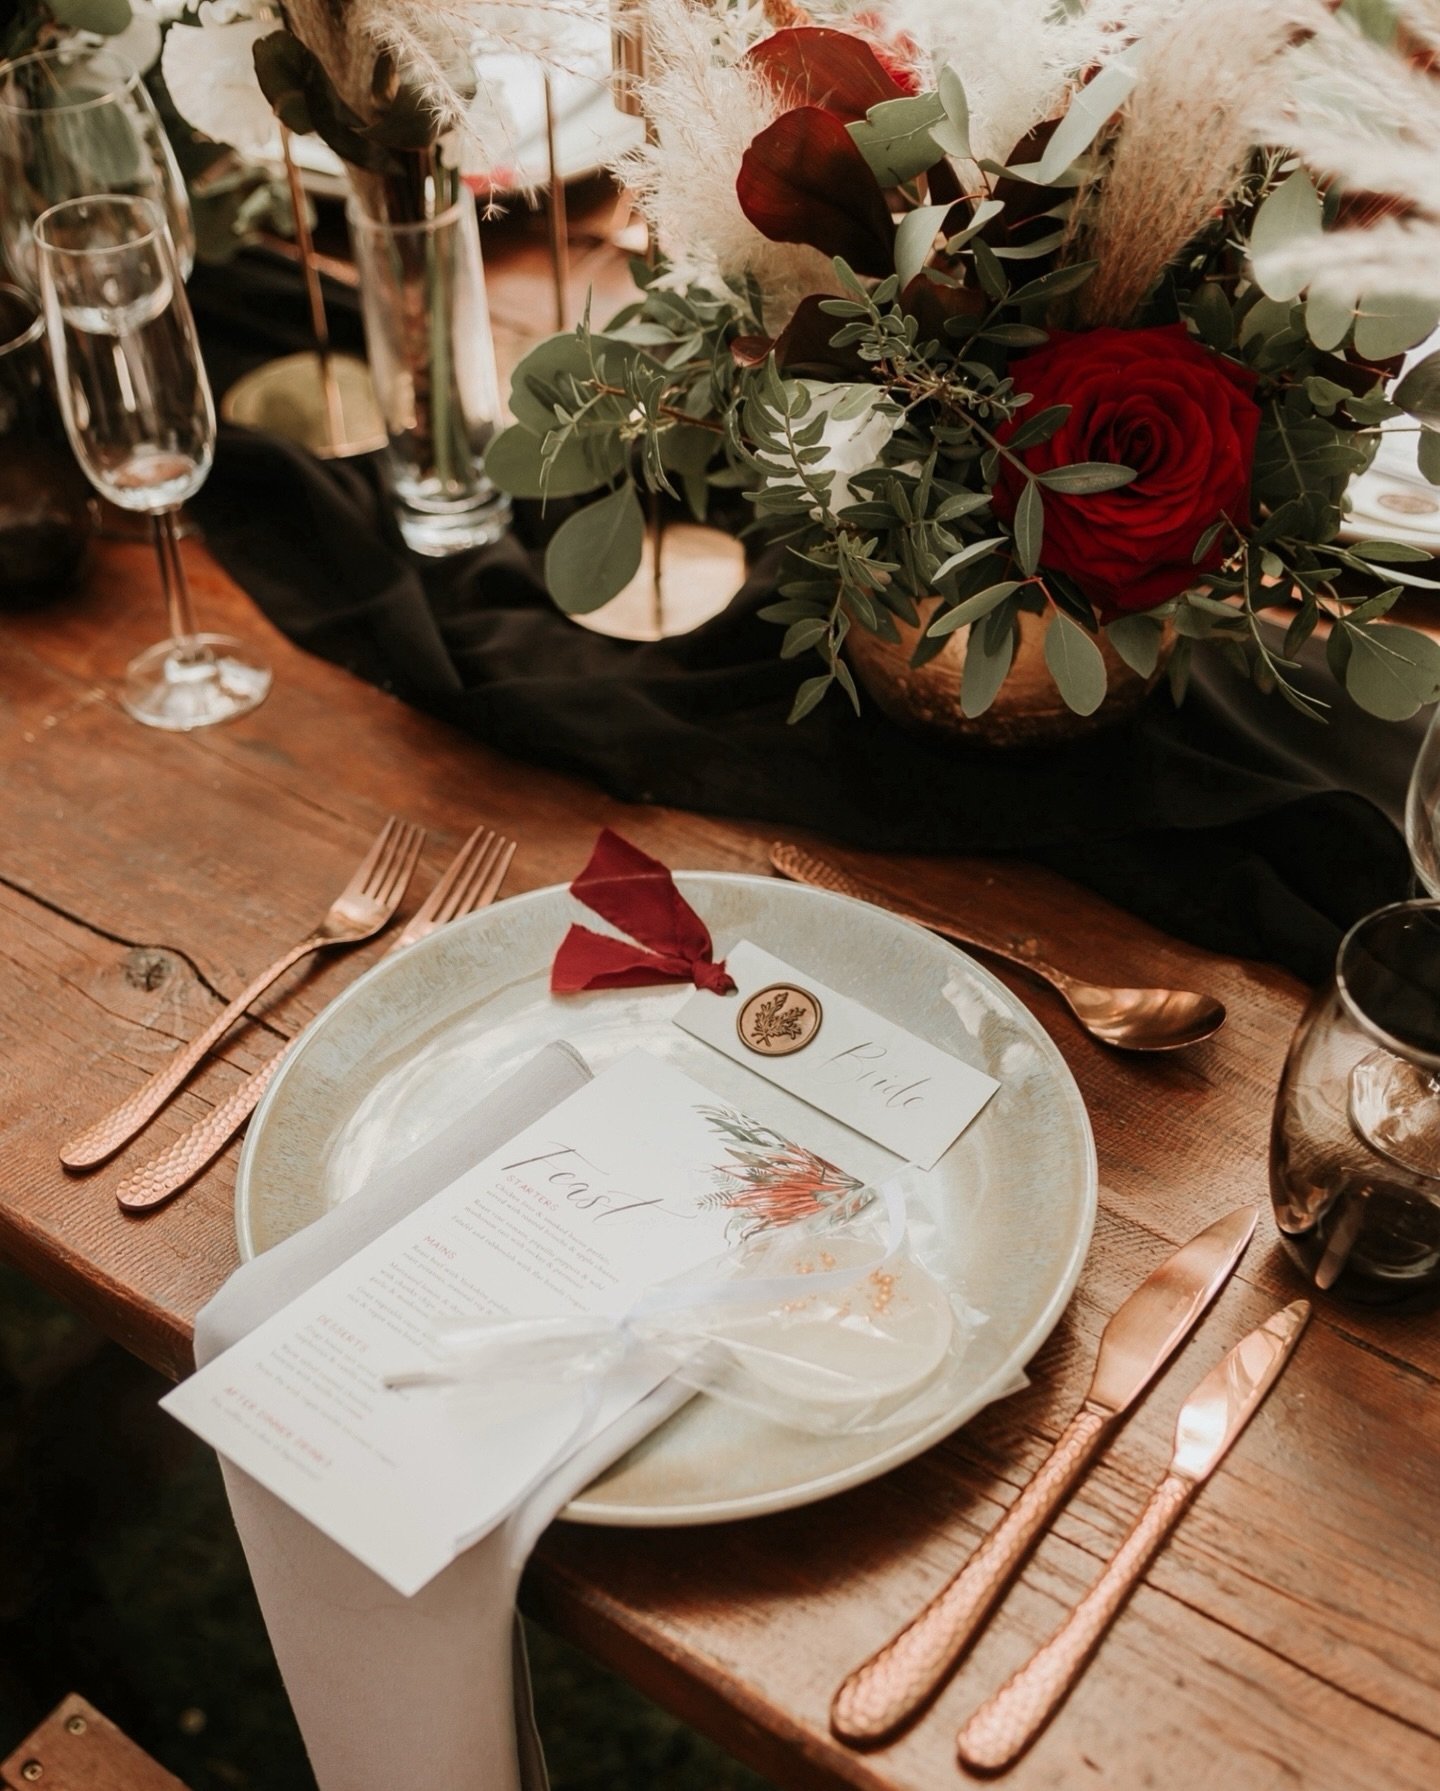 Transform your reception tables and tie everything together with beautiful on the day wedding stationery. These Savanna Collection menus were paired with pale grey card place names finished with gold wax seals and burgundy silk ribbon. 🌹

&mdash;

P